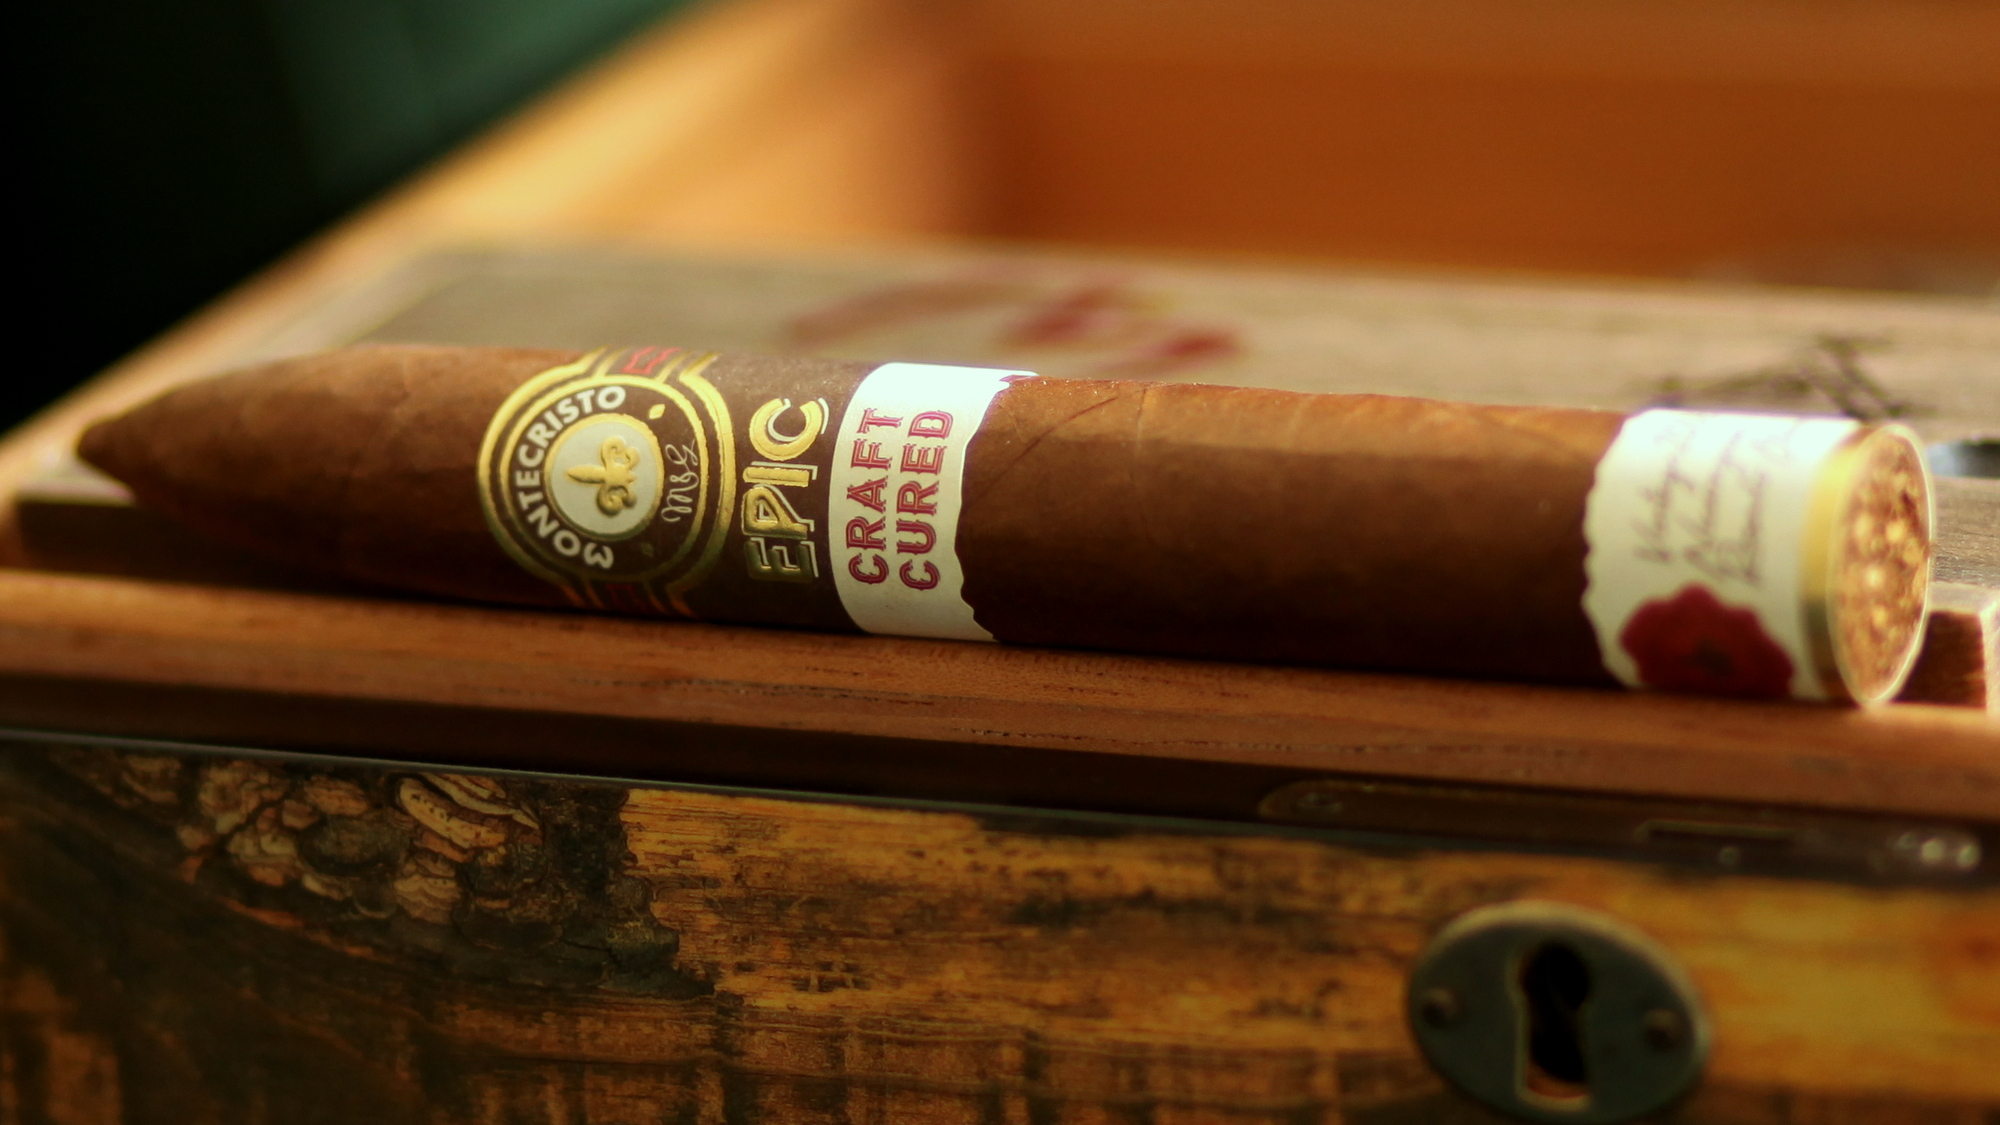 Montecristo Craft Cured Review